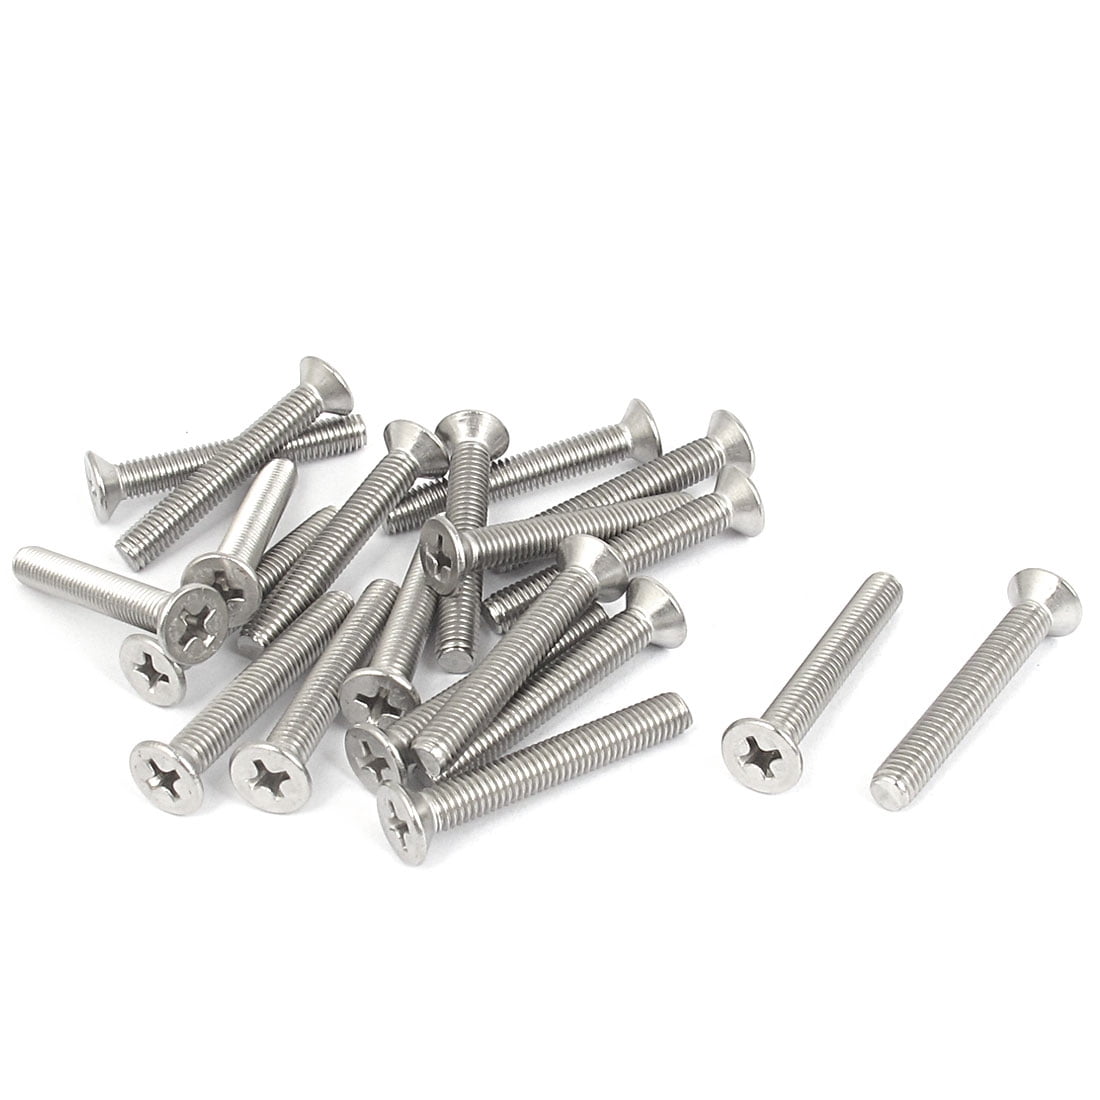 For Metal or Plastic Qty 10 RC Screws M3 x 6 Silver countersunk Metric Thread 